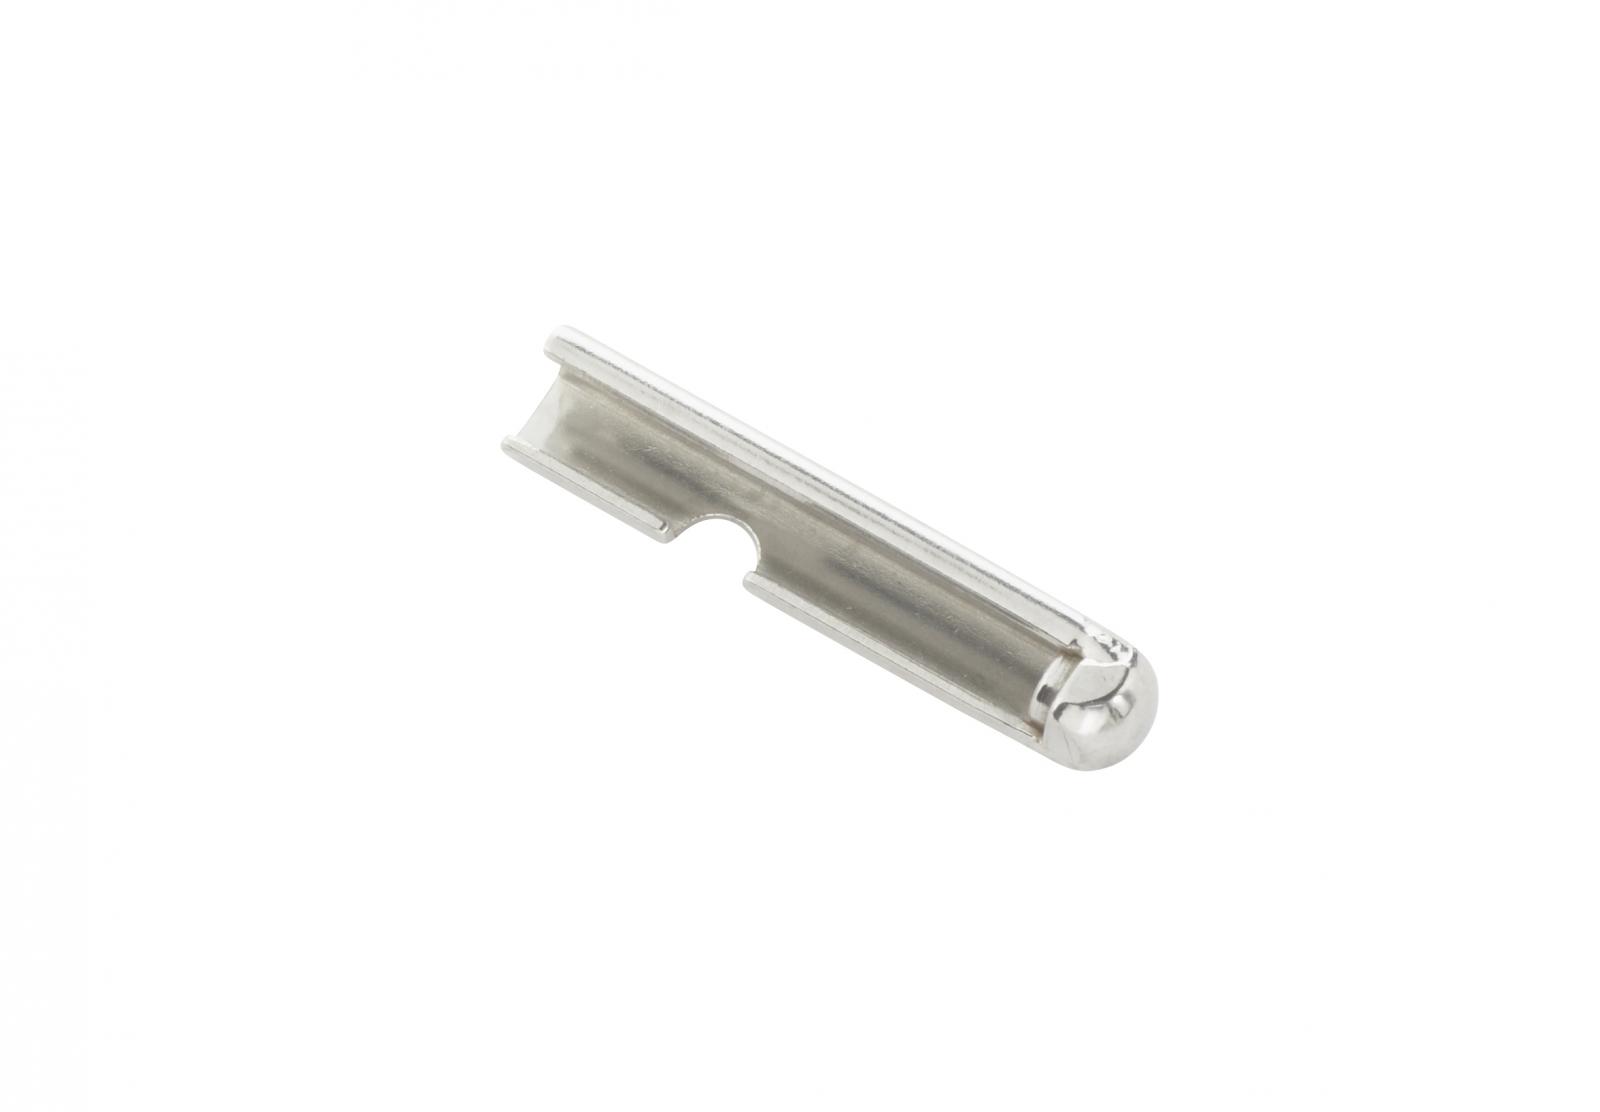 TapeTech® Center Clip Assembly  (Narrow). Part number 404014F